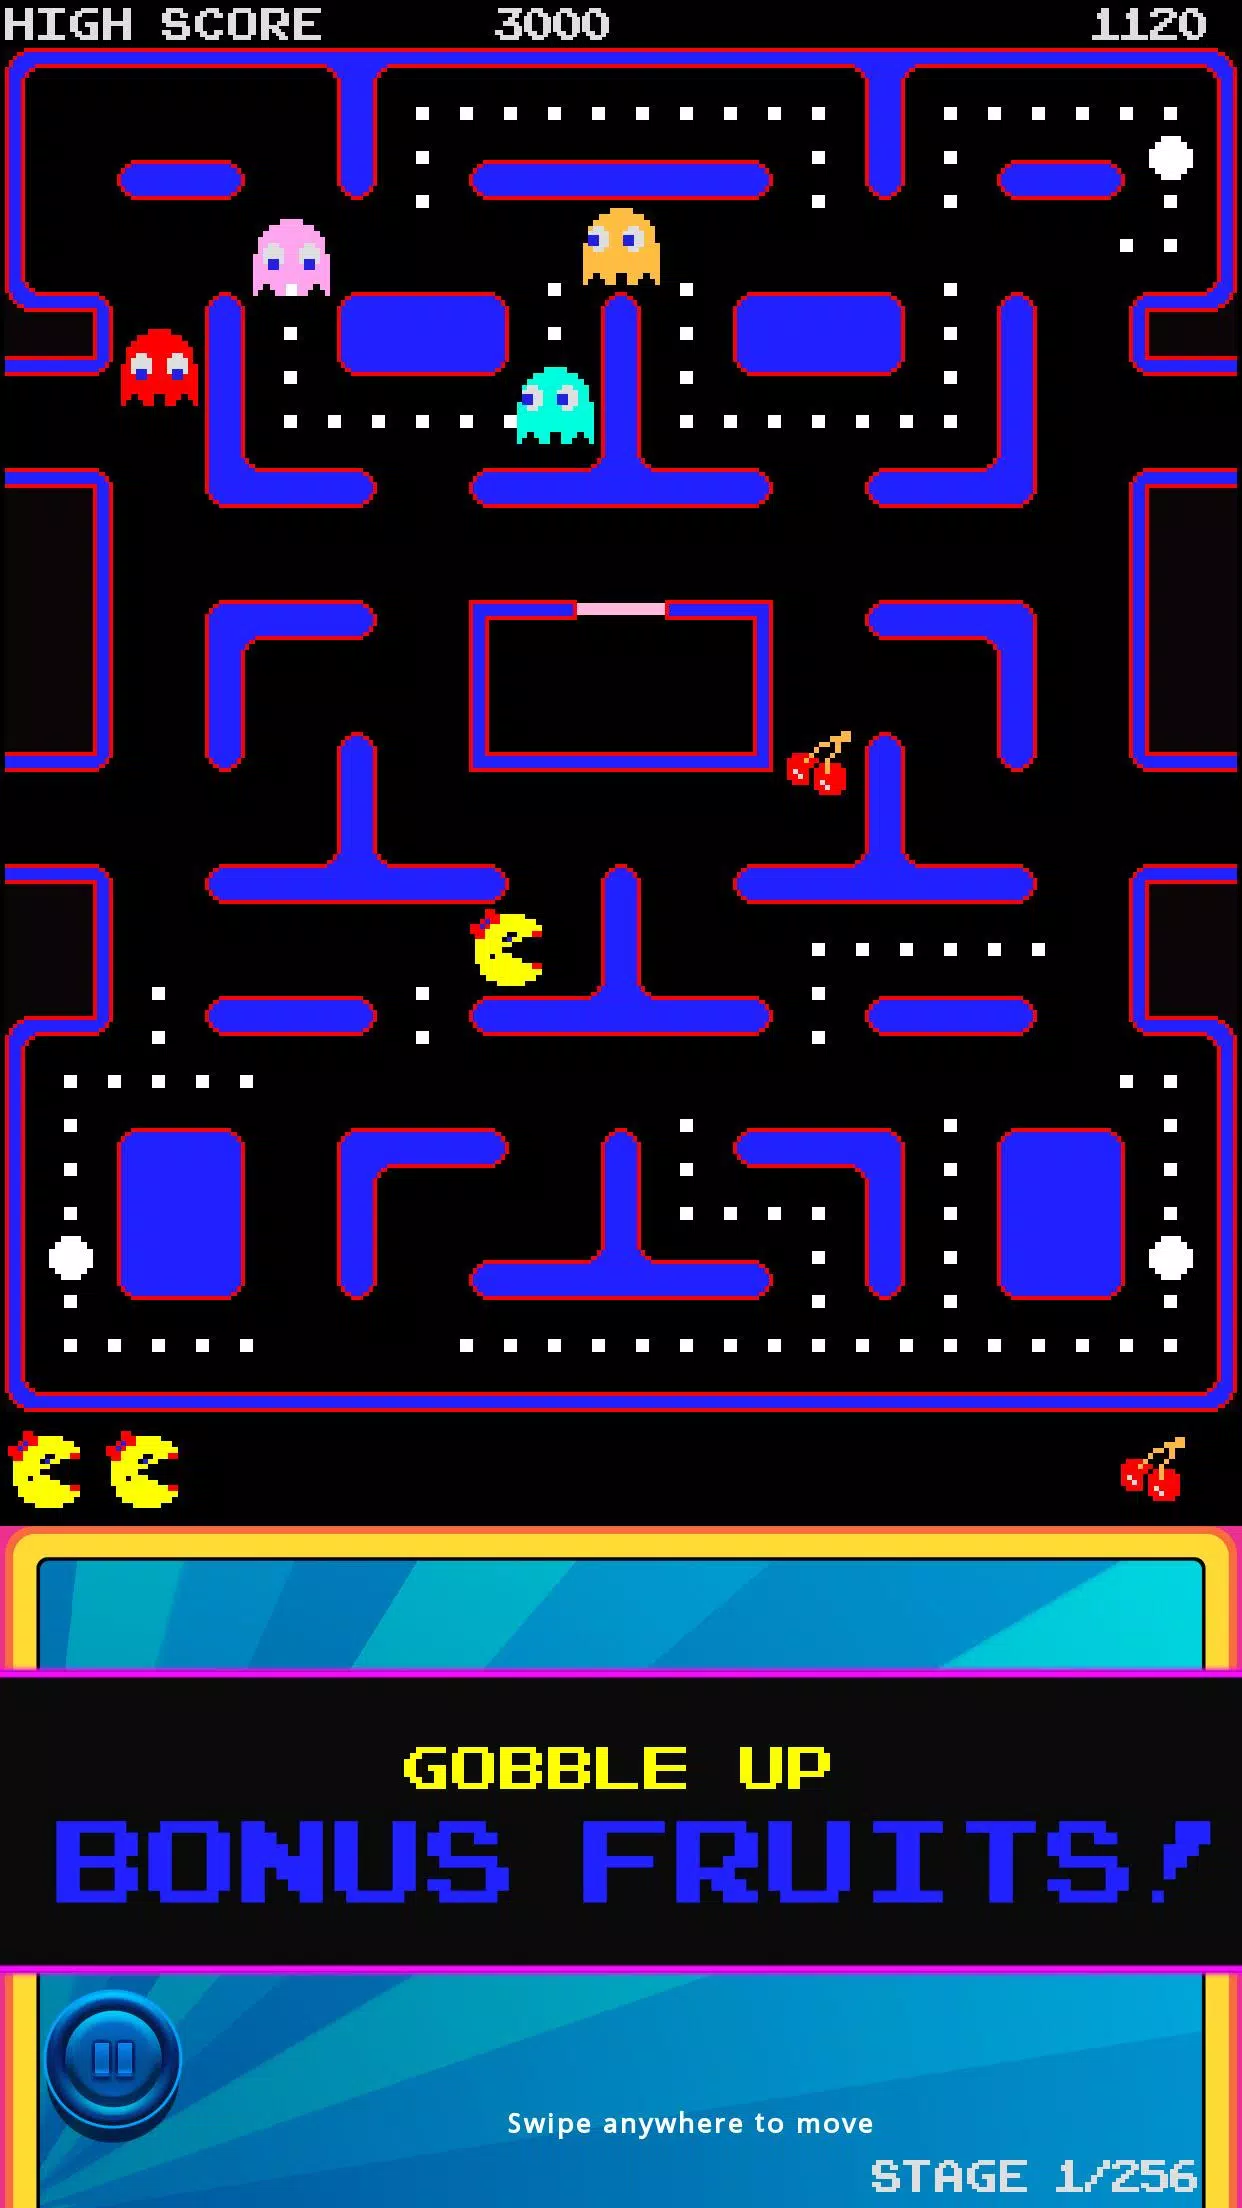 PAC-MAN APK for Android Download